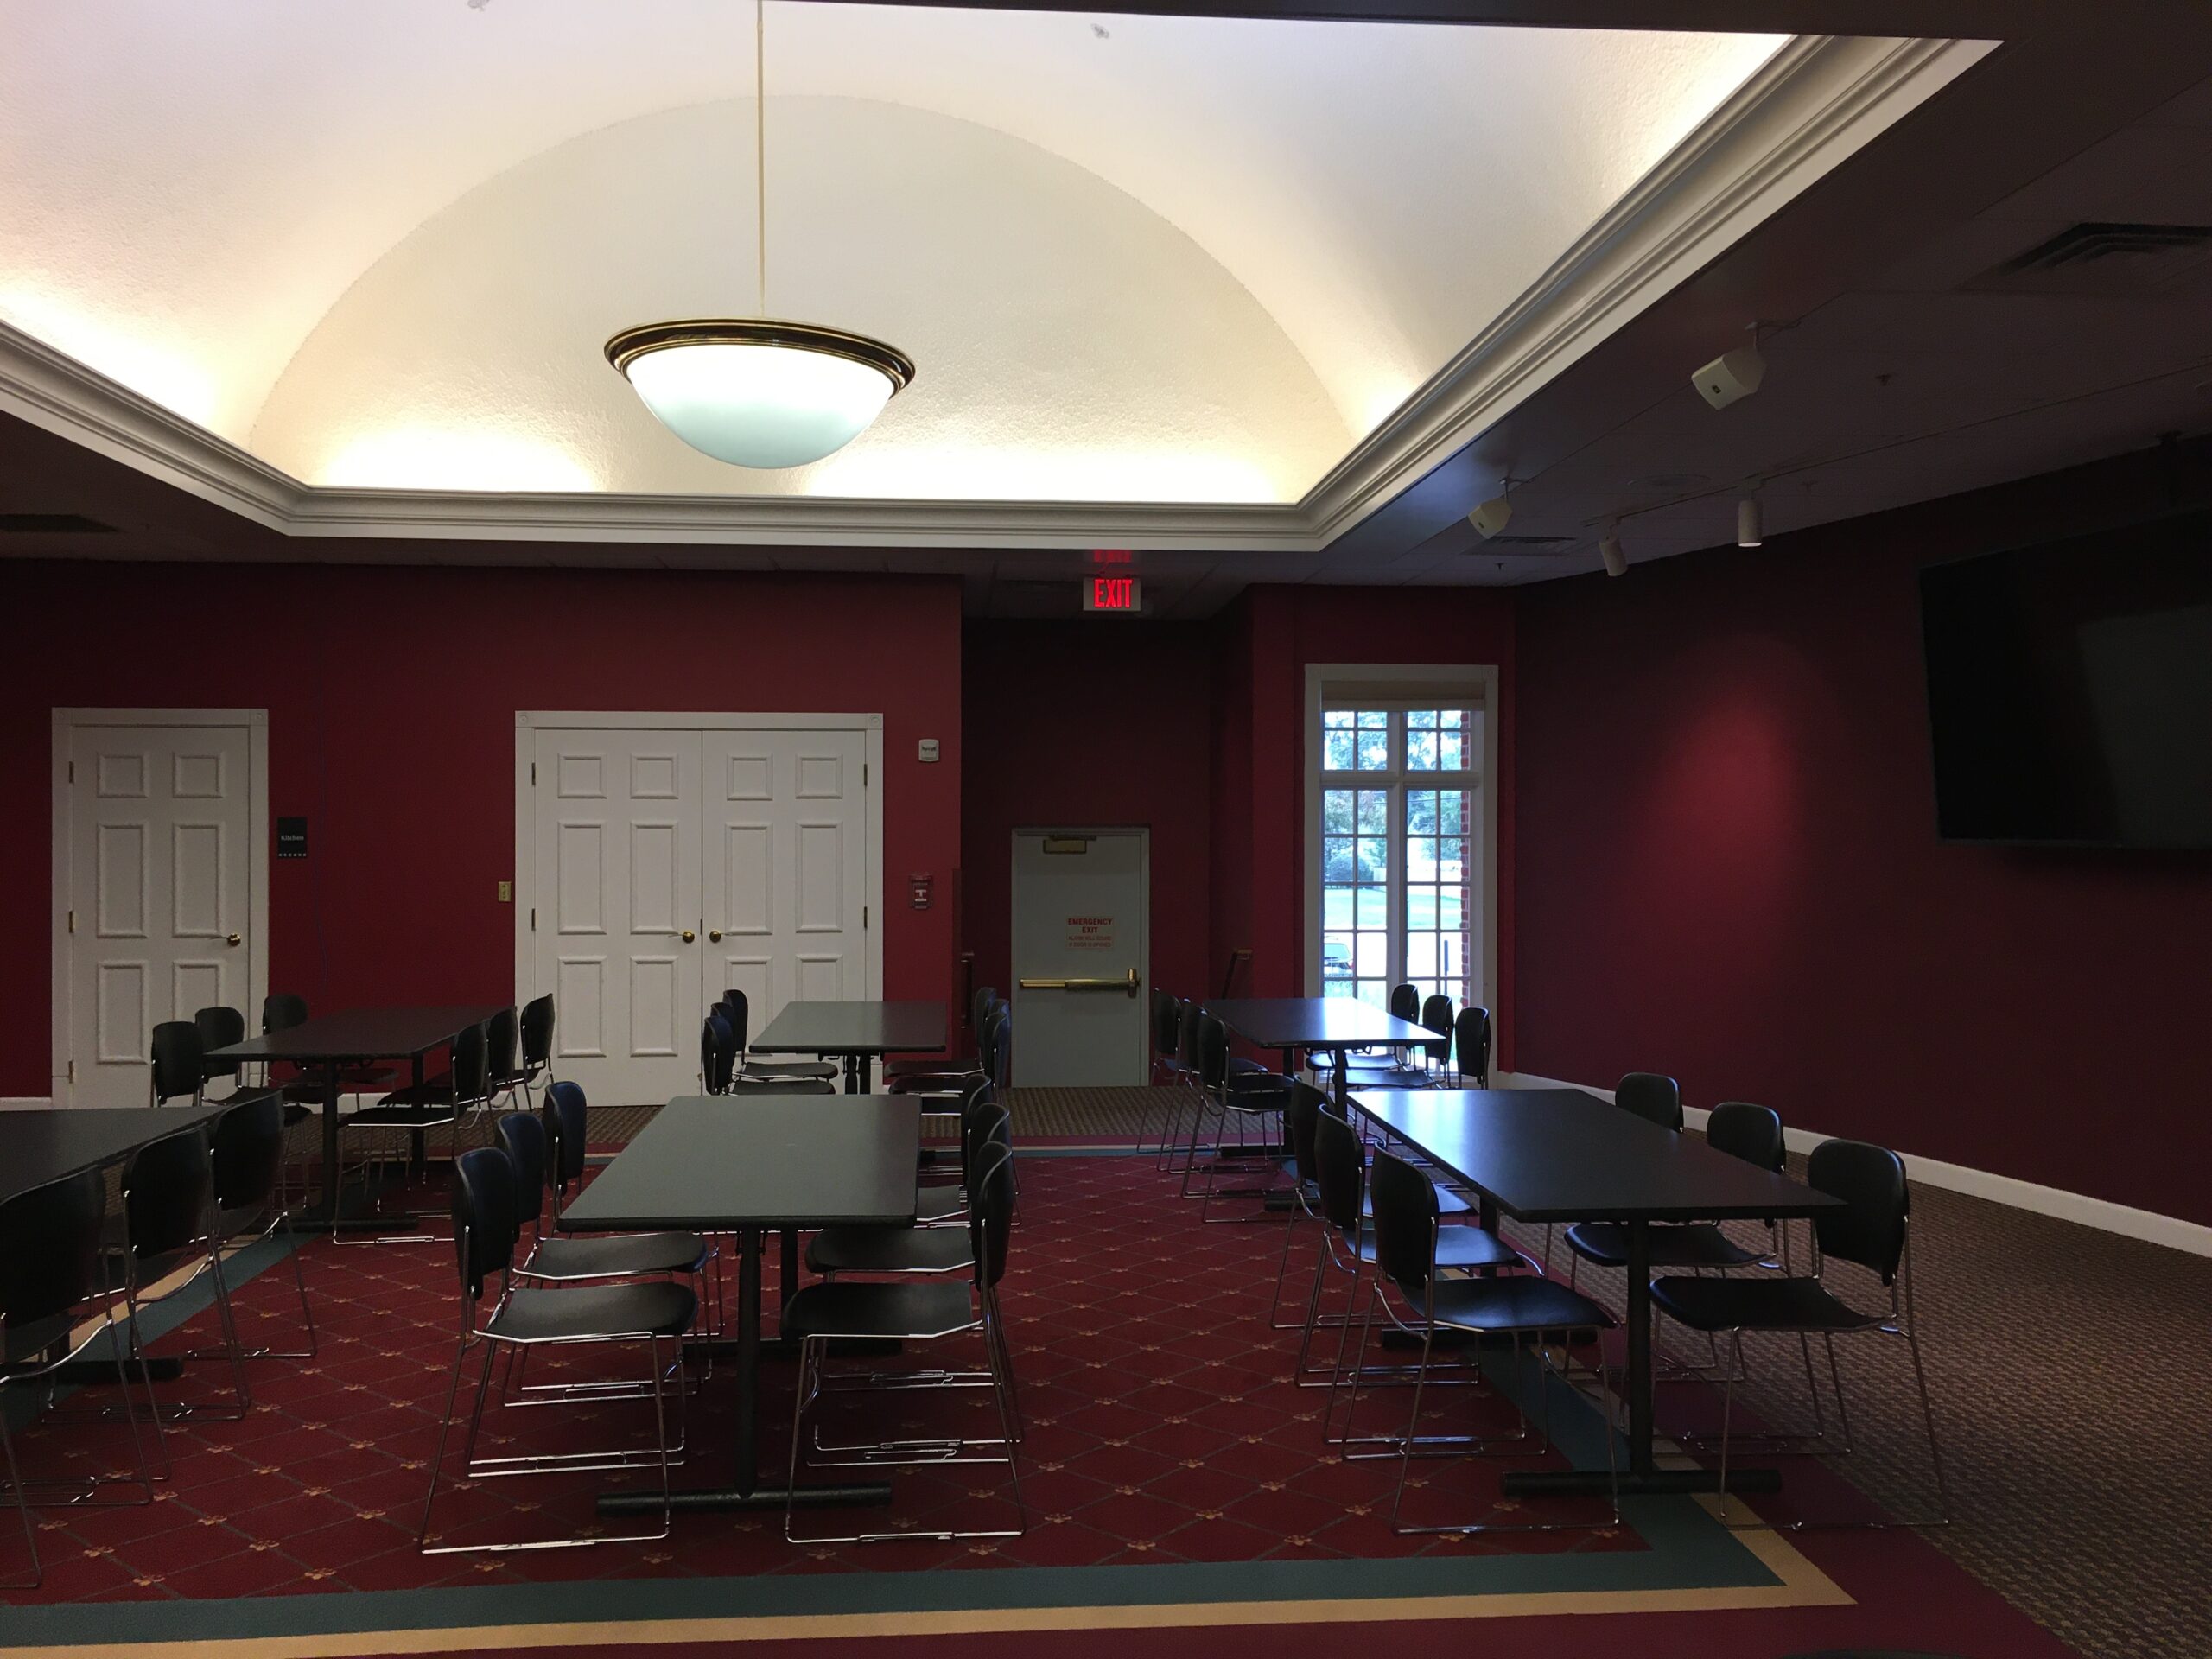 Walldorf Room set up with chairs and tables